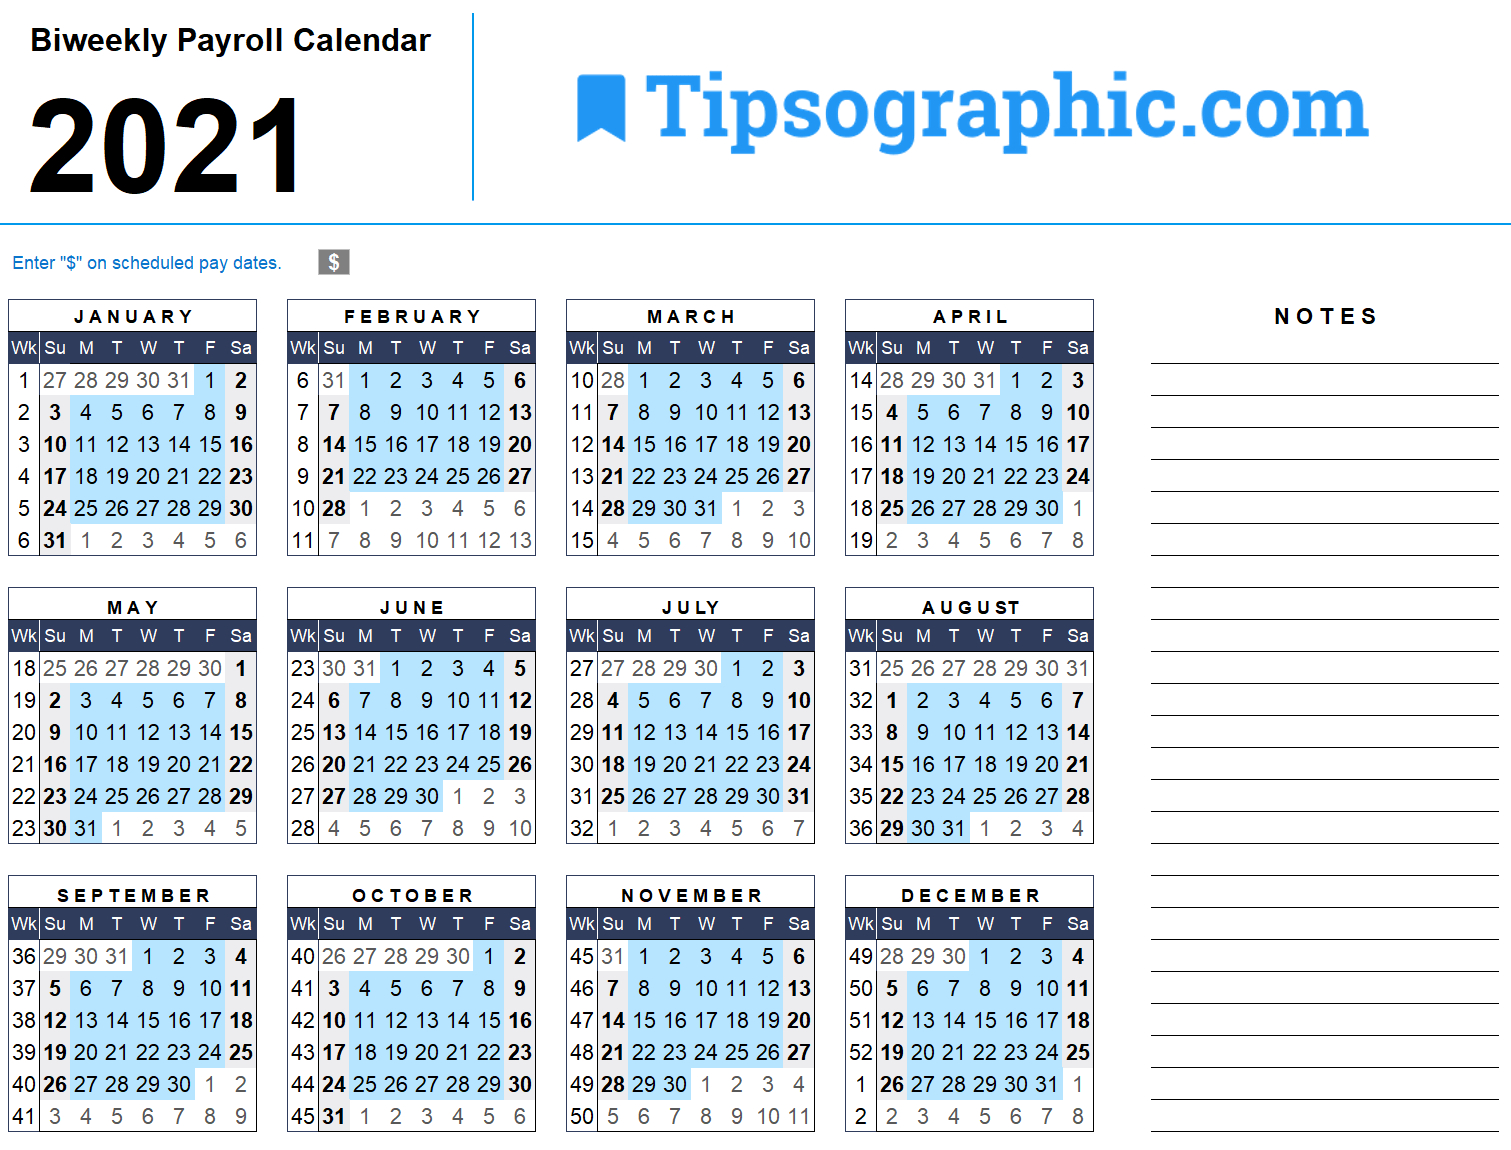 Download The 2021 Biweekly Payroll Calendar | Tipsographic-2021 Vacation Calendar Template Excel